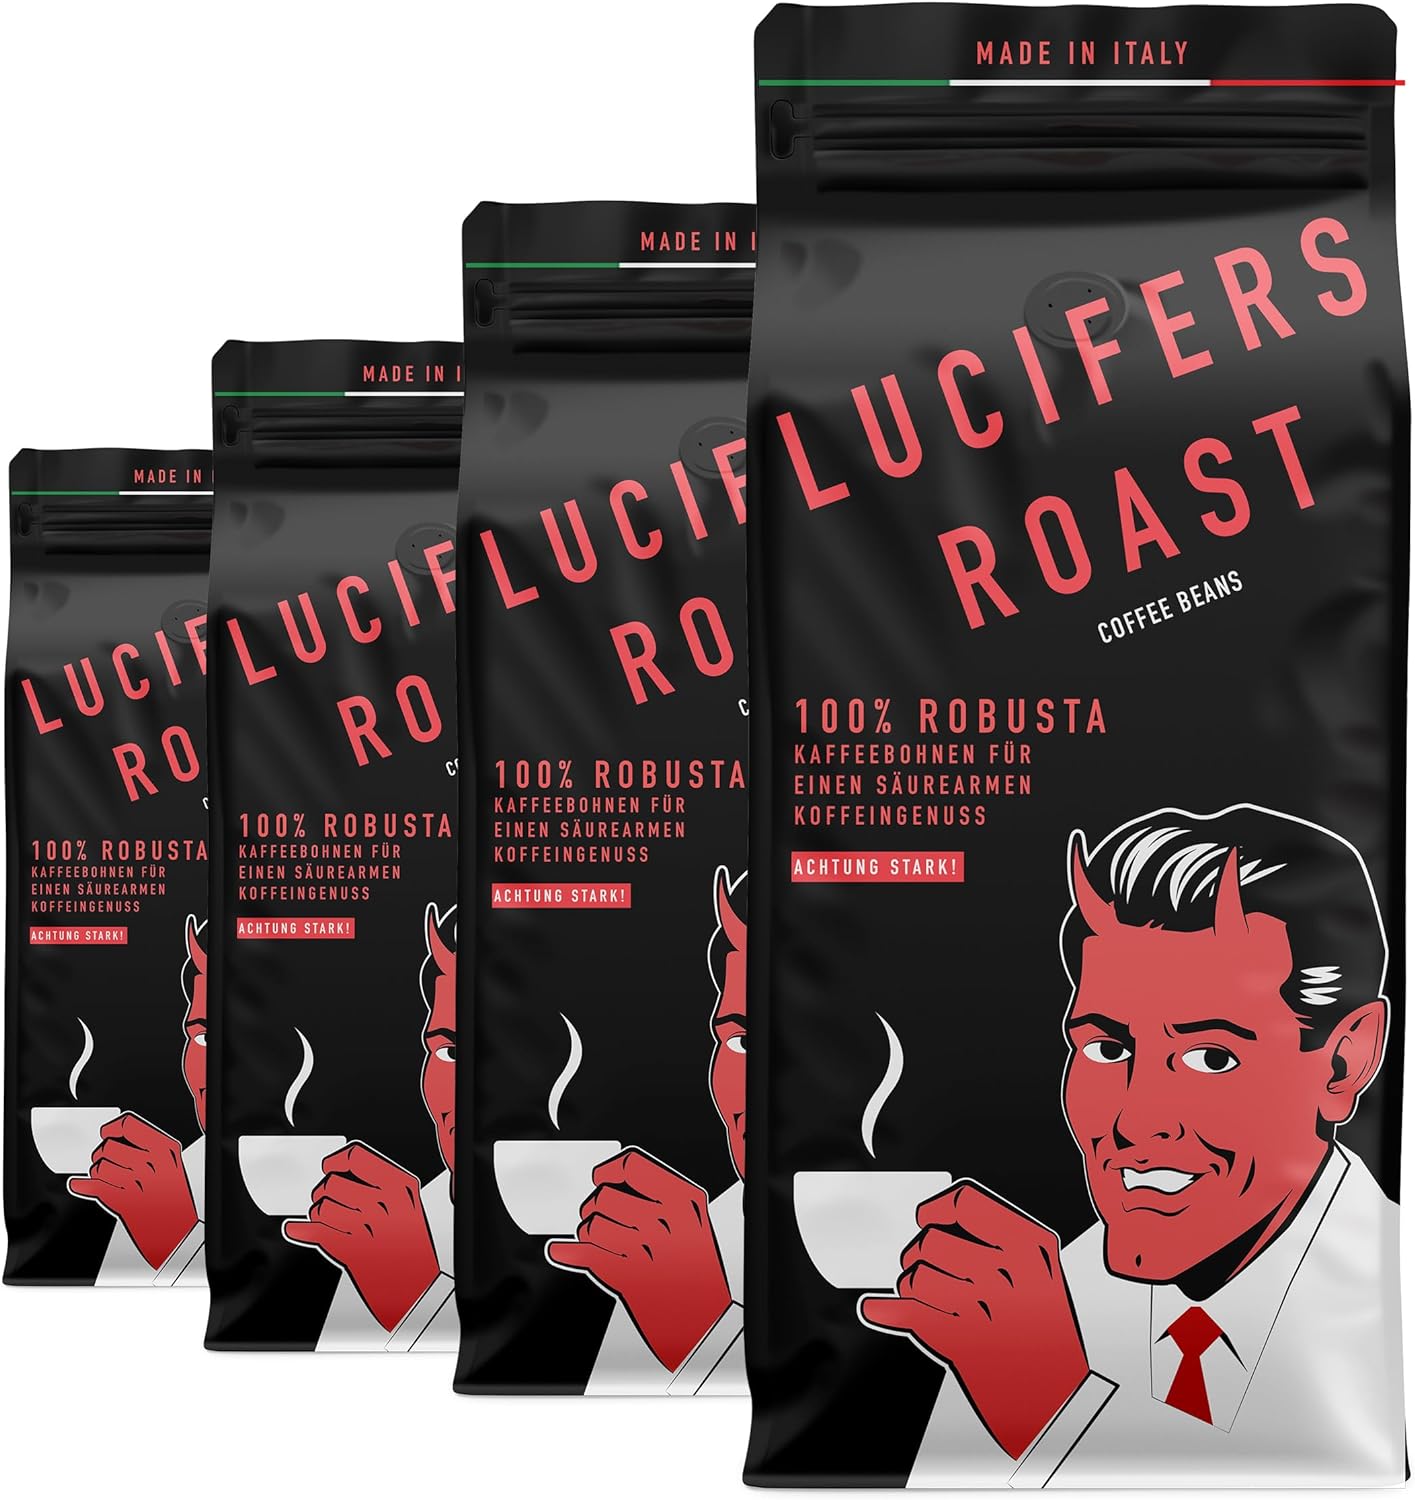 LUCIFERS ROAST strong coffee beans from Italy - very strong espresso - low acid - for coffee machines or portafilter